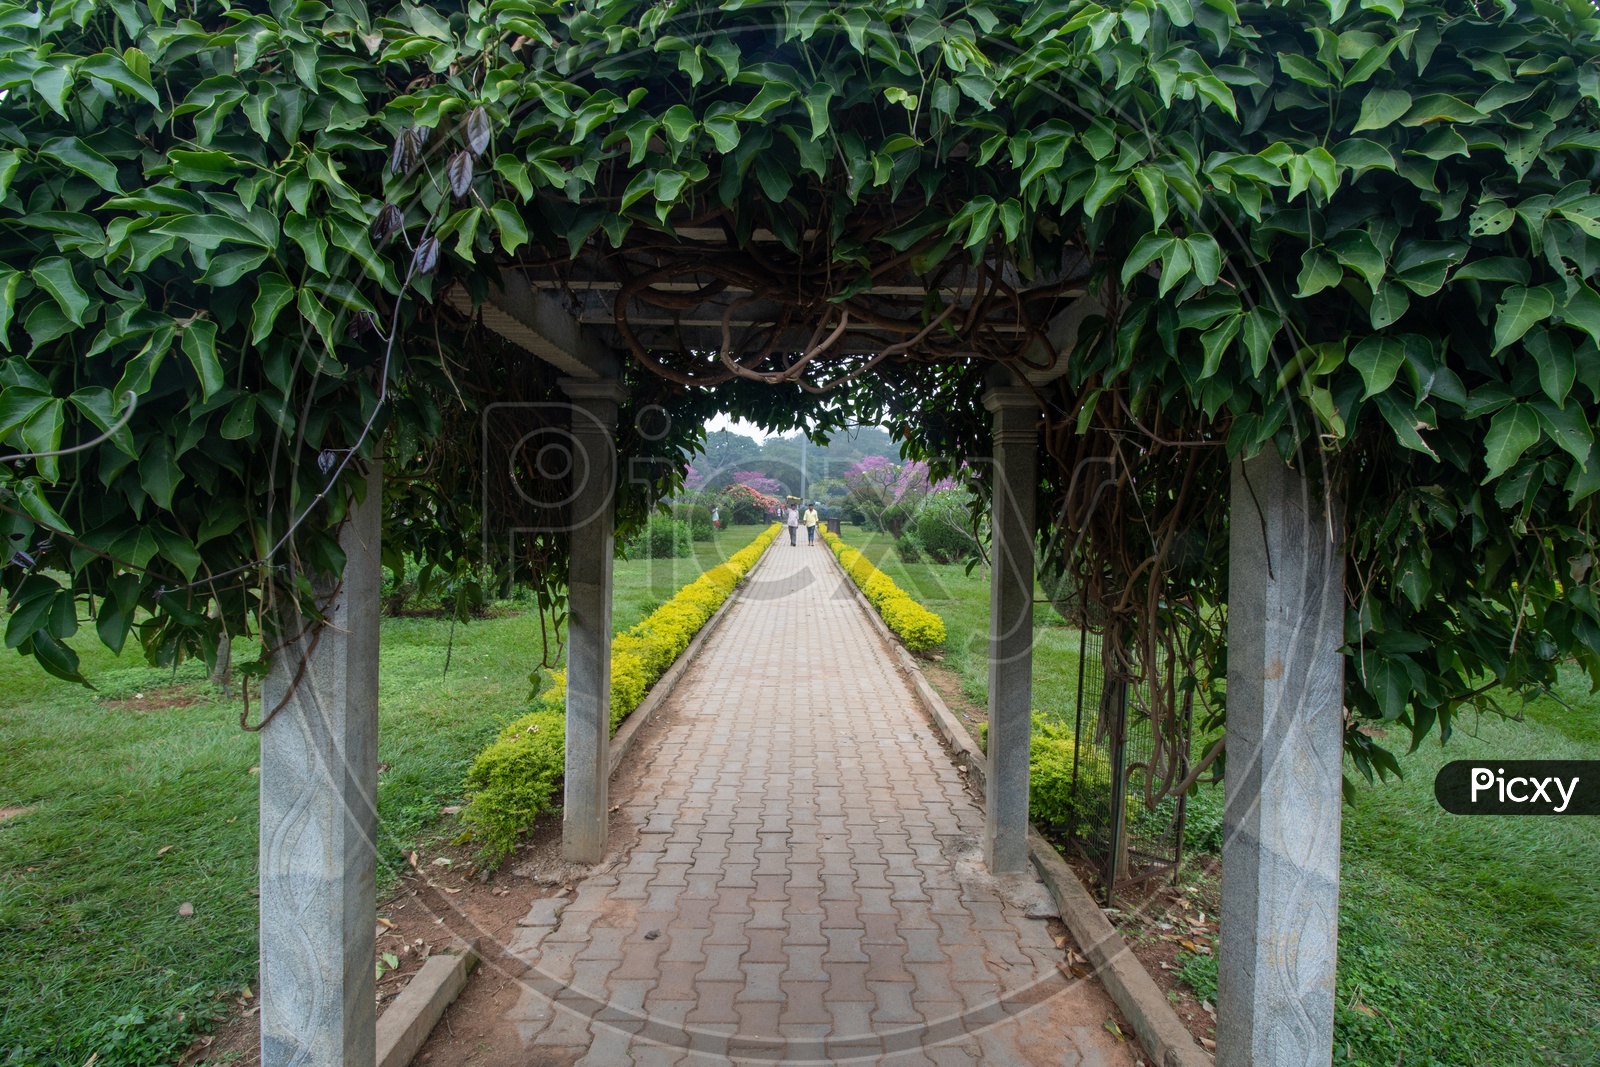 Roads in Cubbon Park / A Beautiful Pathway With Plants Cuddled Around  the Way Forming a Scenic Beautiful Way